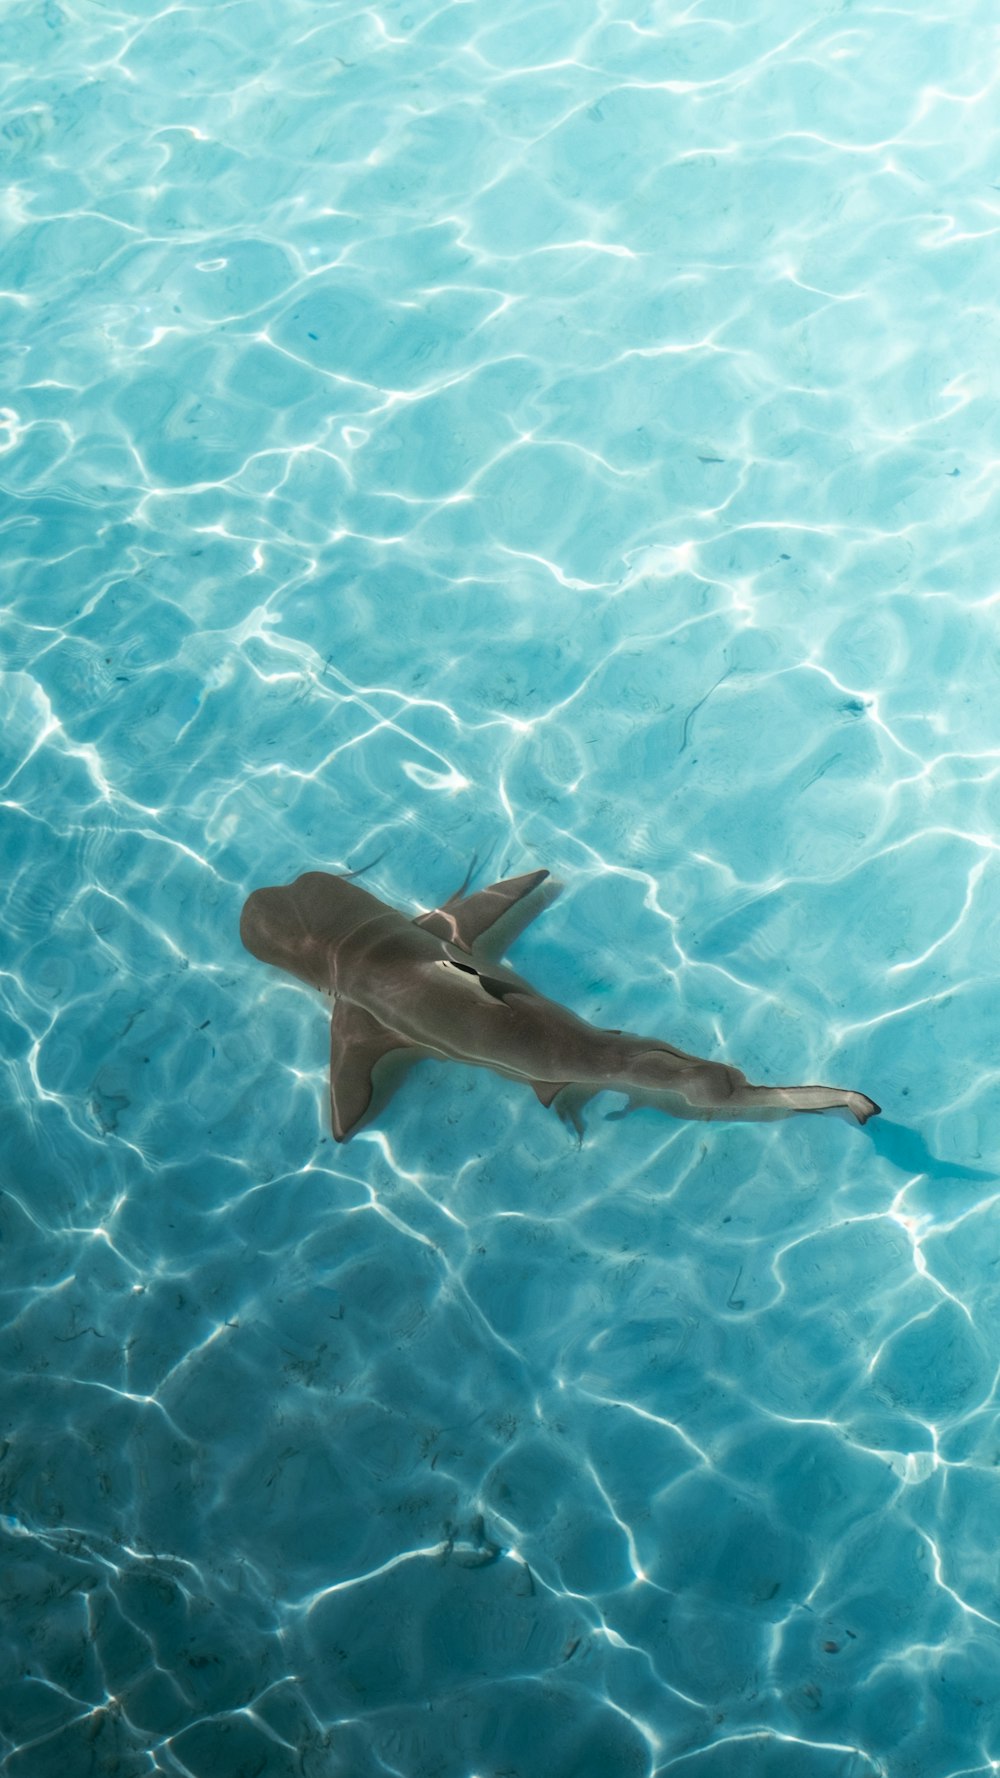 a shark swimming in a pool of water